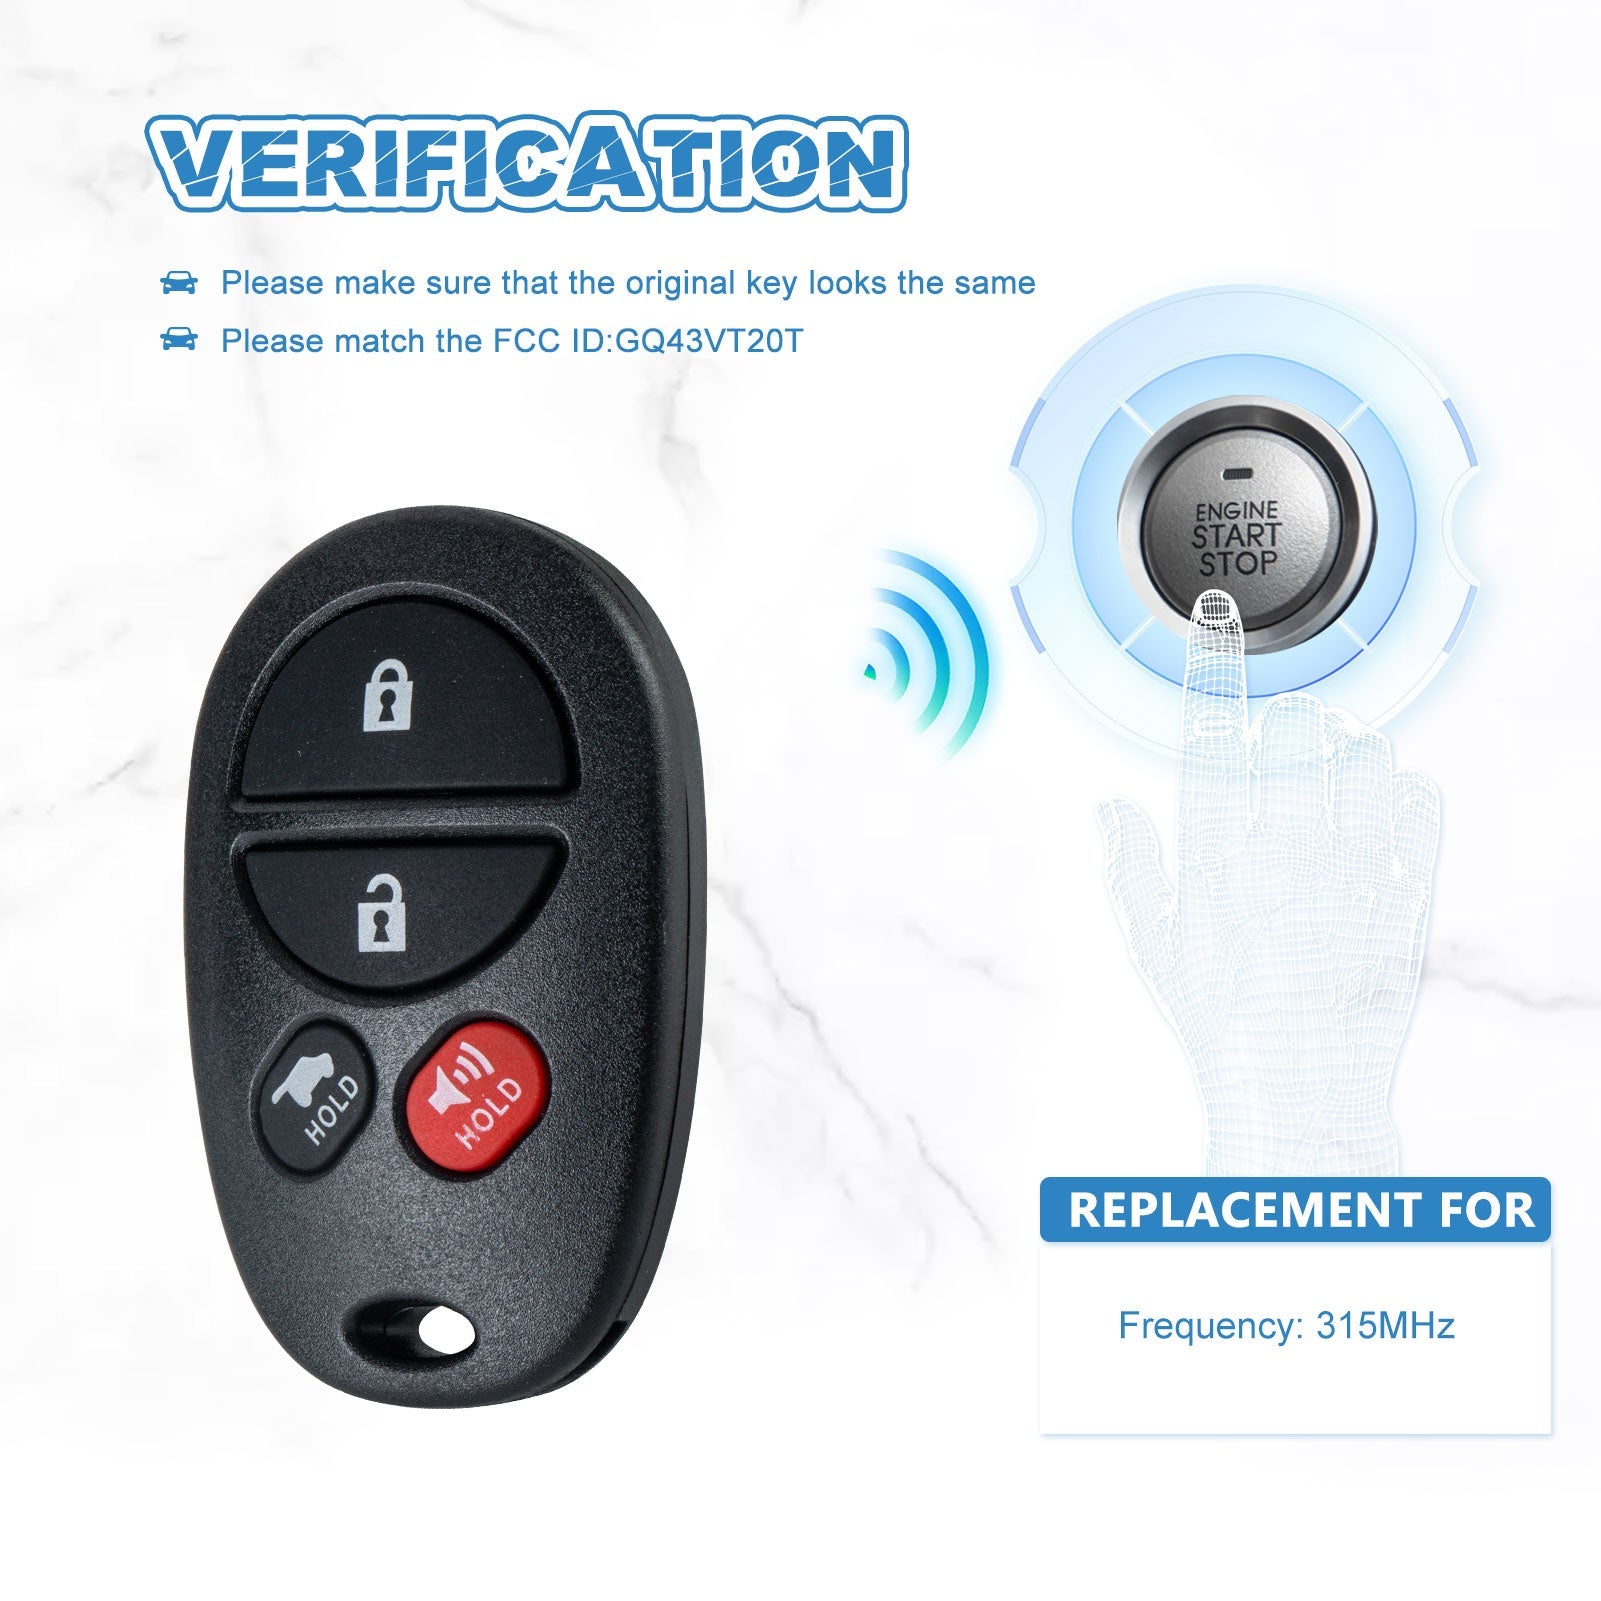 315MHZ Keyless Entry Remote Control Replacement for 2008-2016 Toyota Sequoia 2007-2015 Toyota Highland GQ43VT20T  KR-T4RD-05